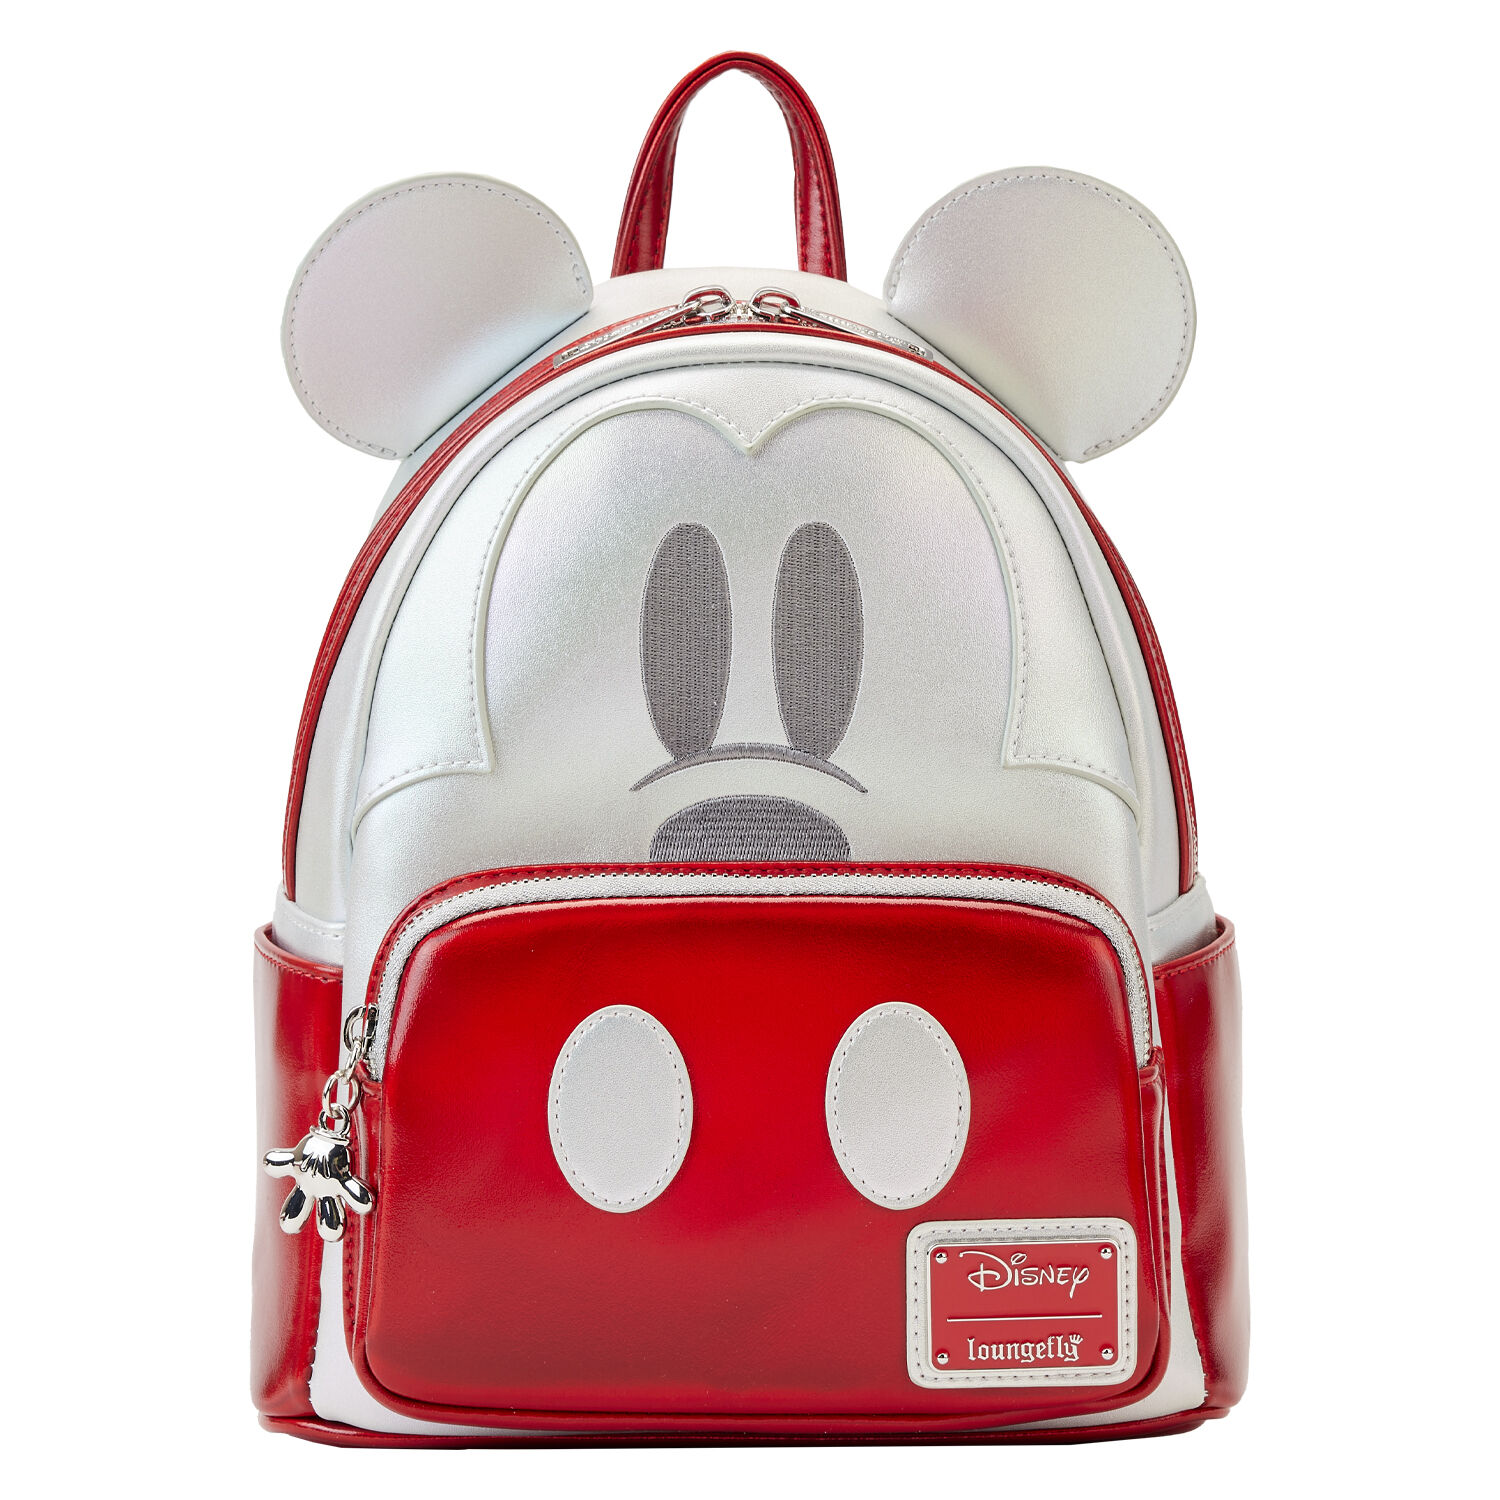 Cute Disney Mickey Mouse Loungefly Backpack iuu.org.tr